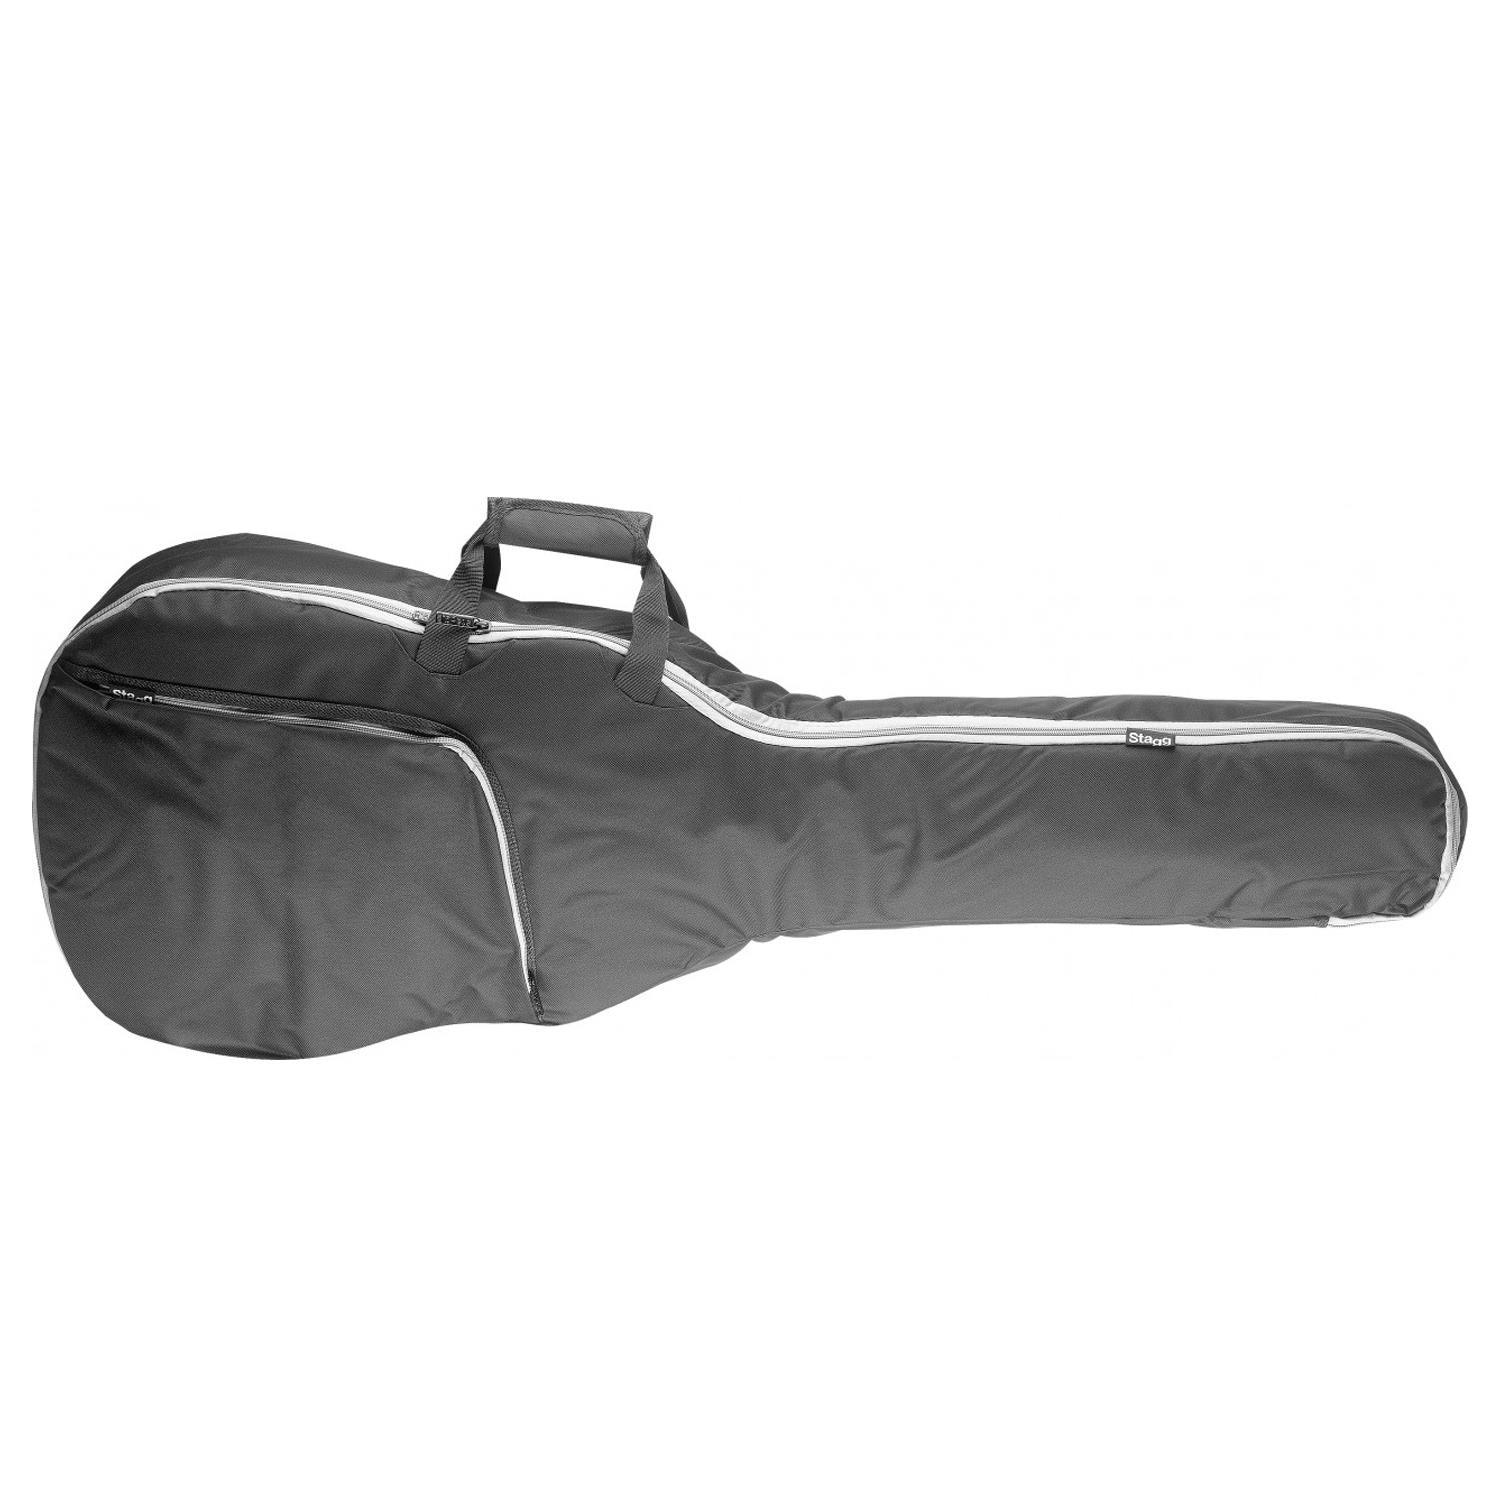 Stagg STB-10 J Jumbo Acoustic Guitar Gig Bag - DY Pro Audio